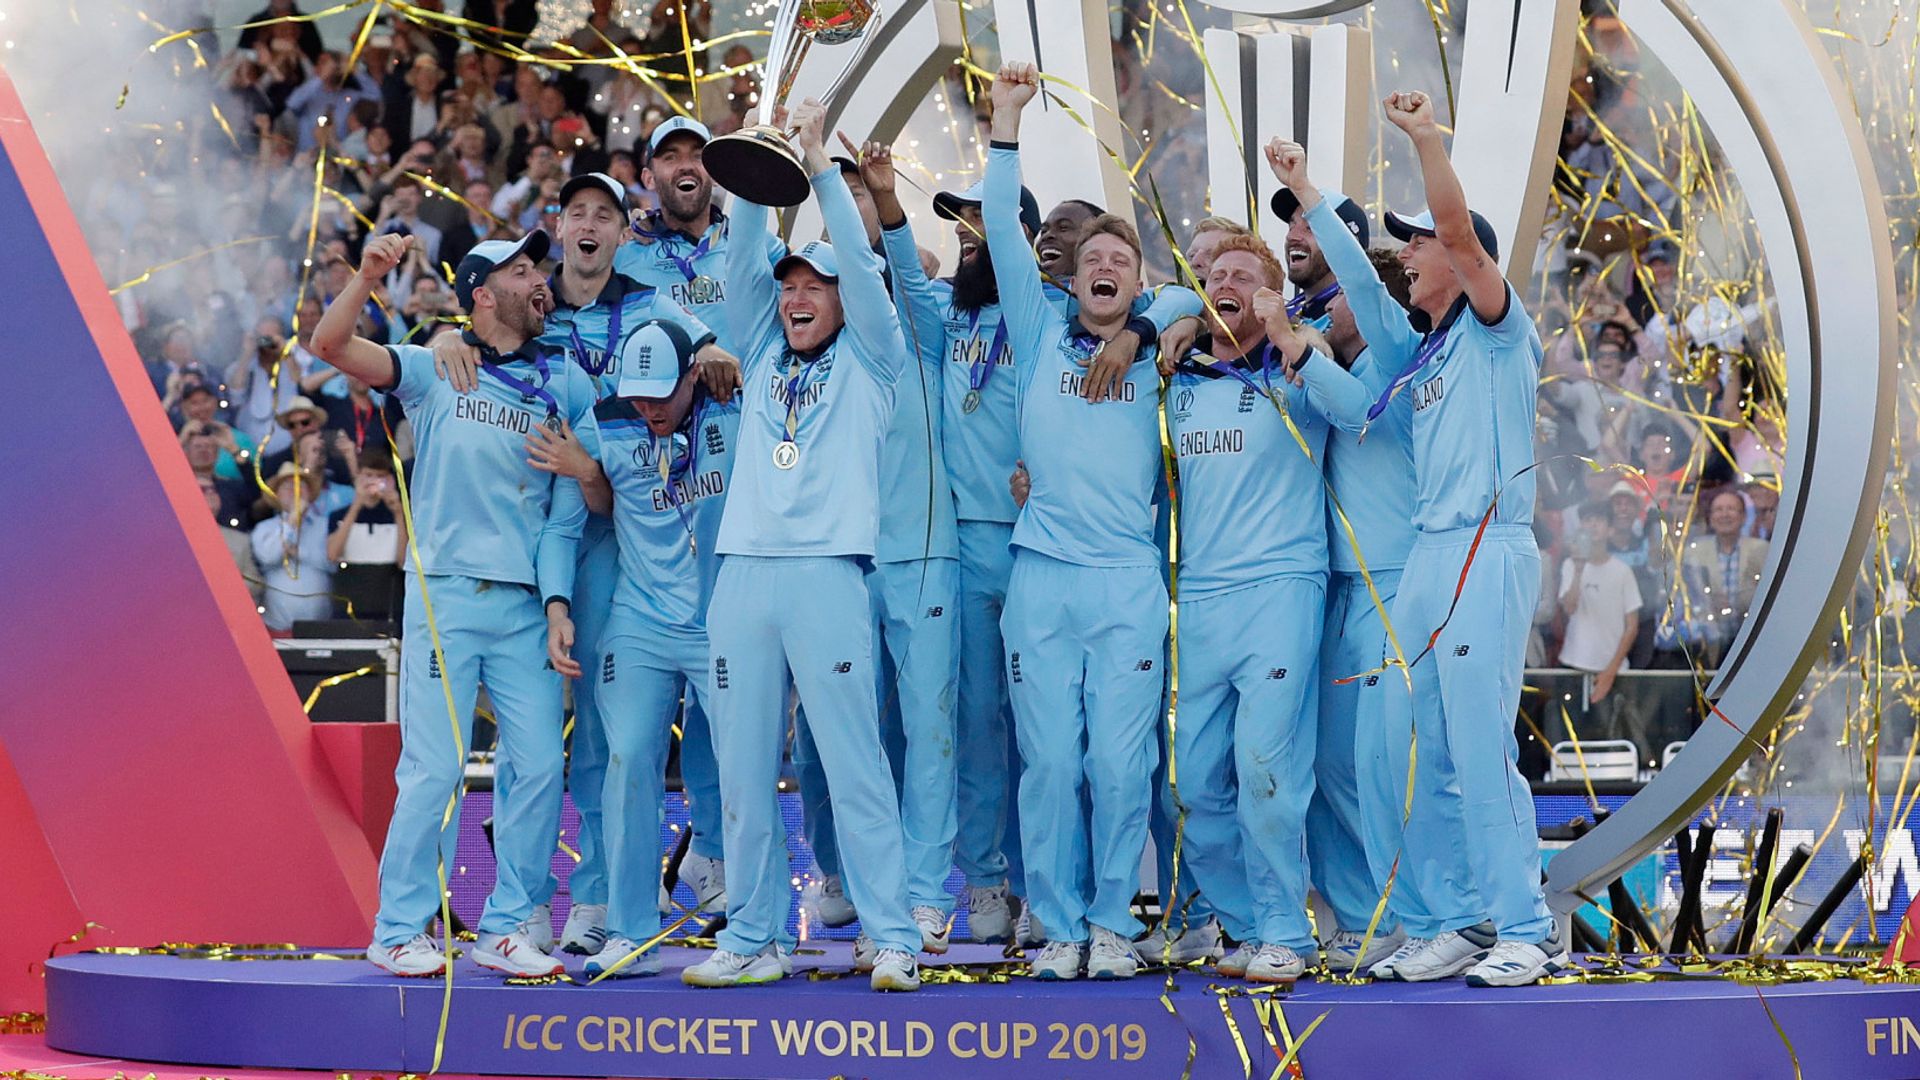 England's road to World Cup glory in 2019